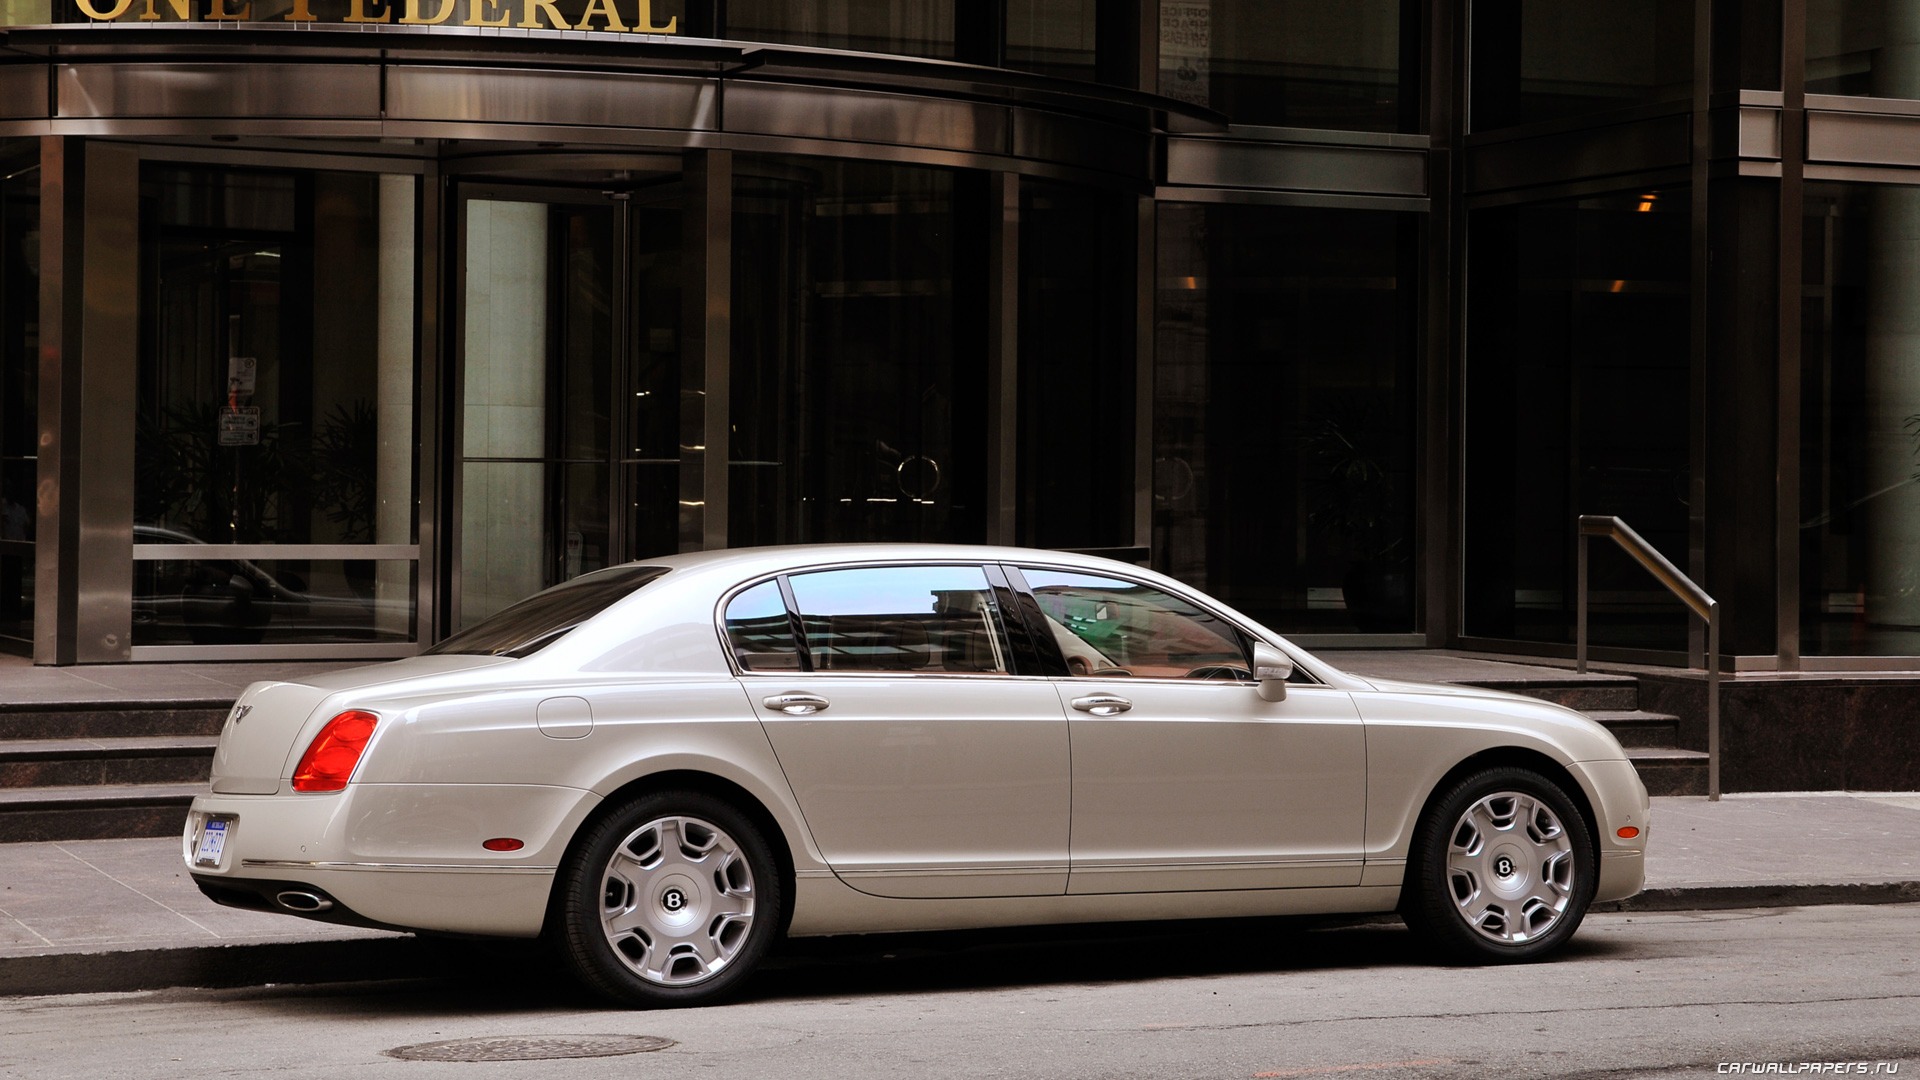 Bentley Continental Flying Spur - 2008 宾利5 - 1920x1080